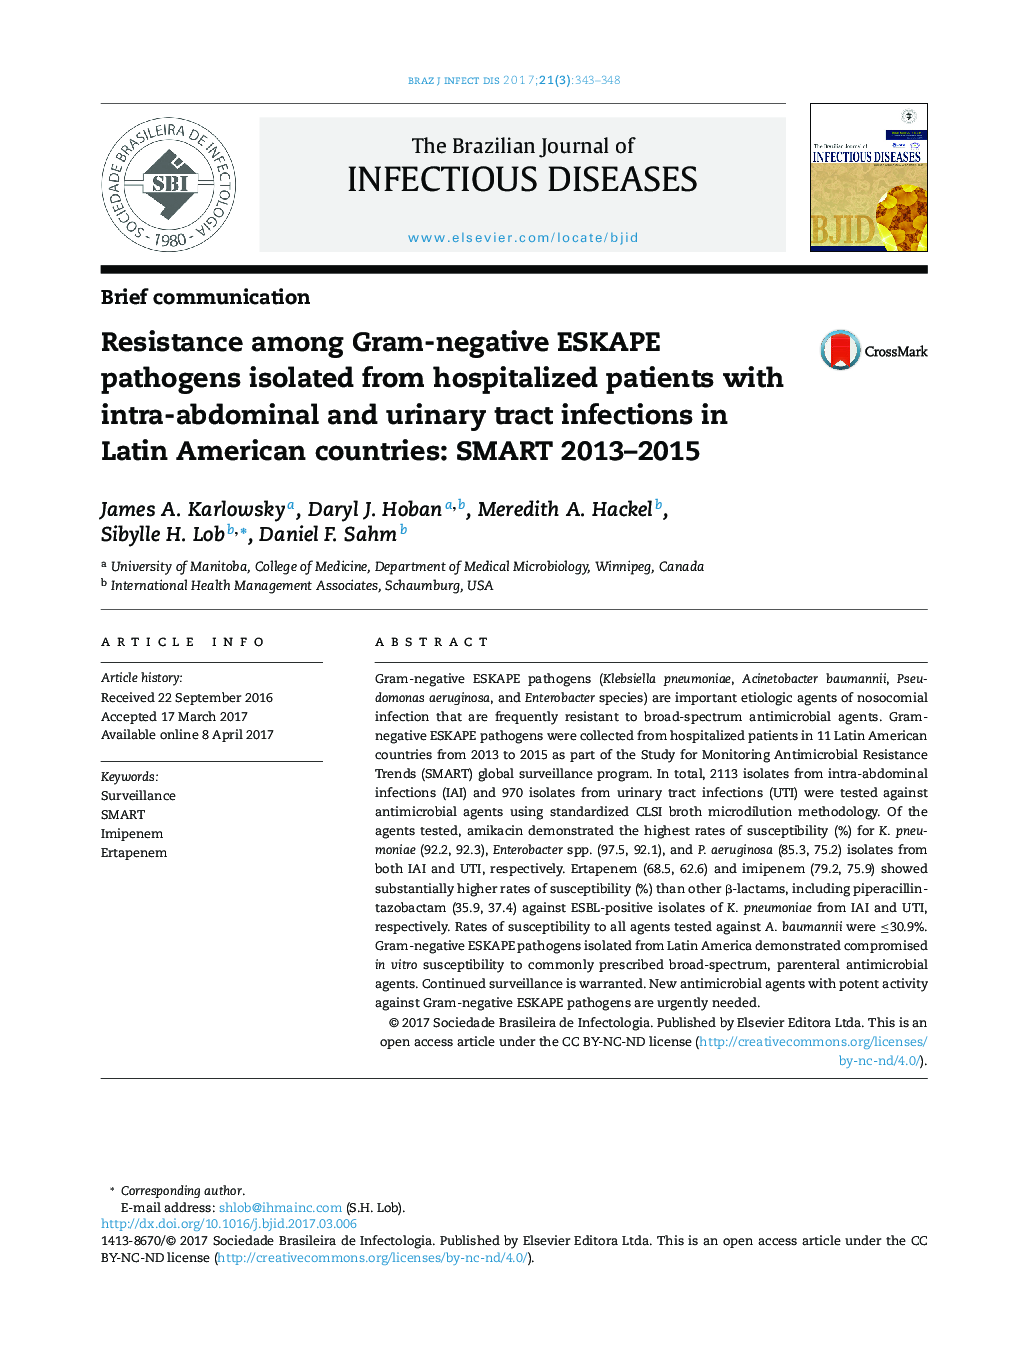 Resistance among Gram-negative ESKAPE pathogens isolated from hospitalized patients with intra-abdominal and urinary tract infections in Latin American countries: SMART 2013-2015